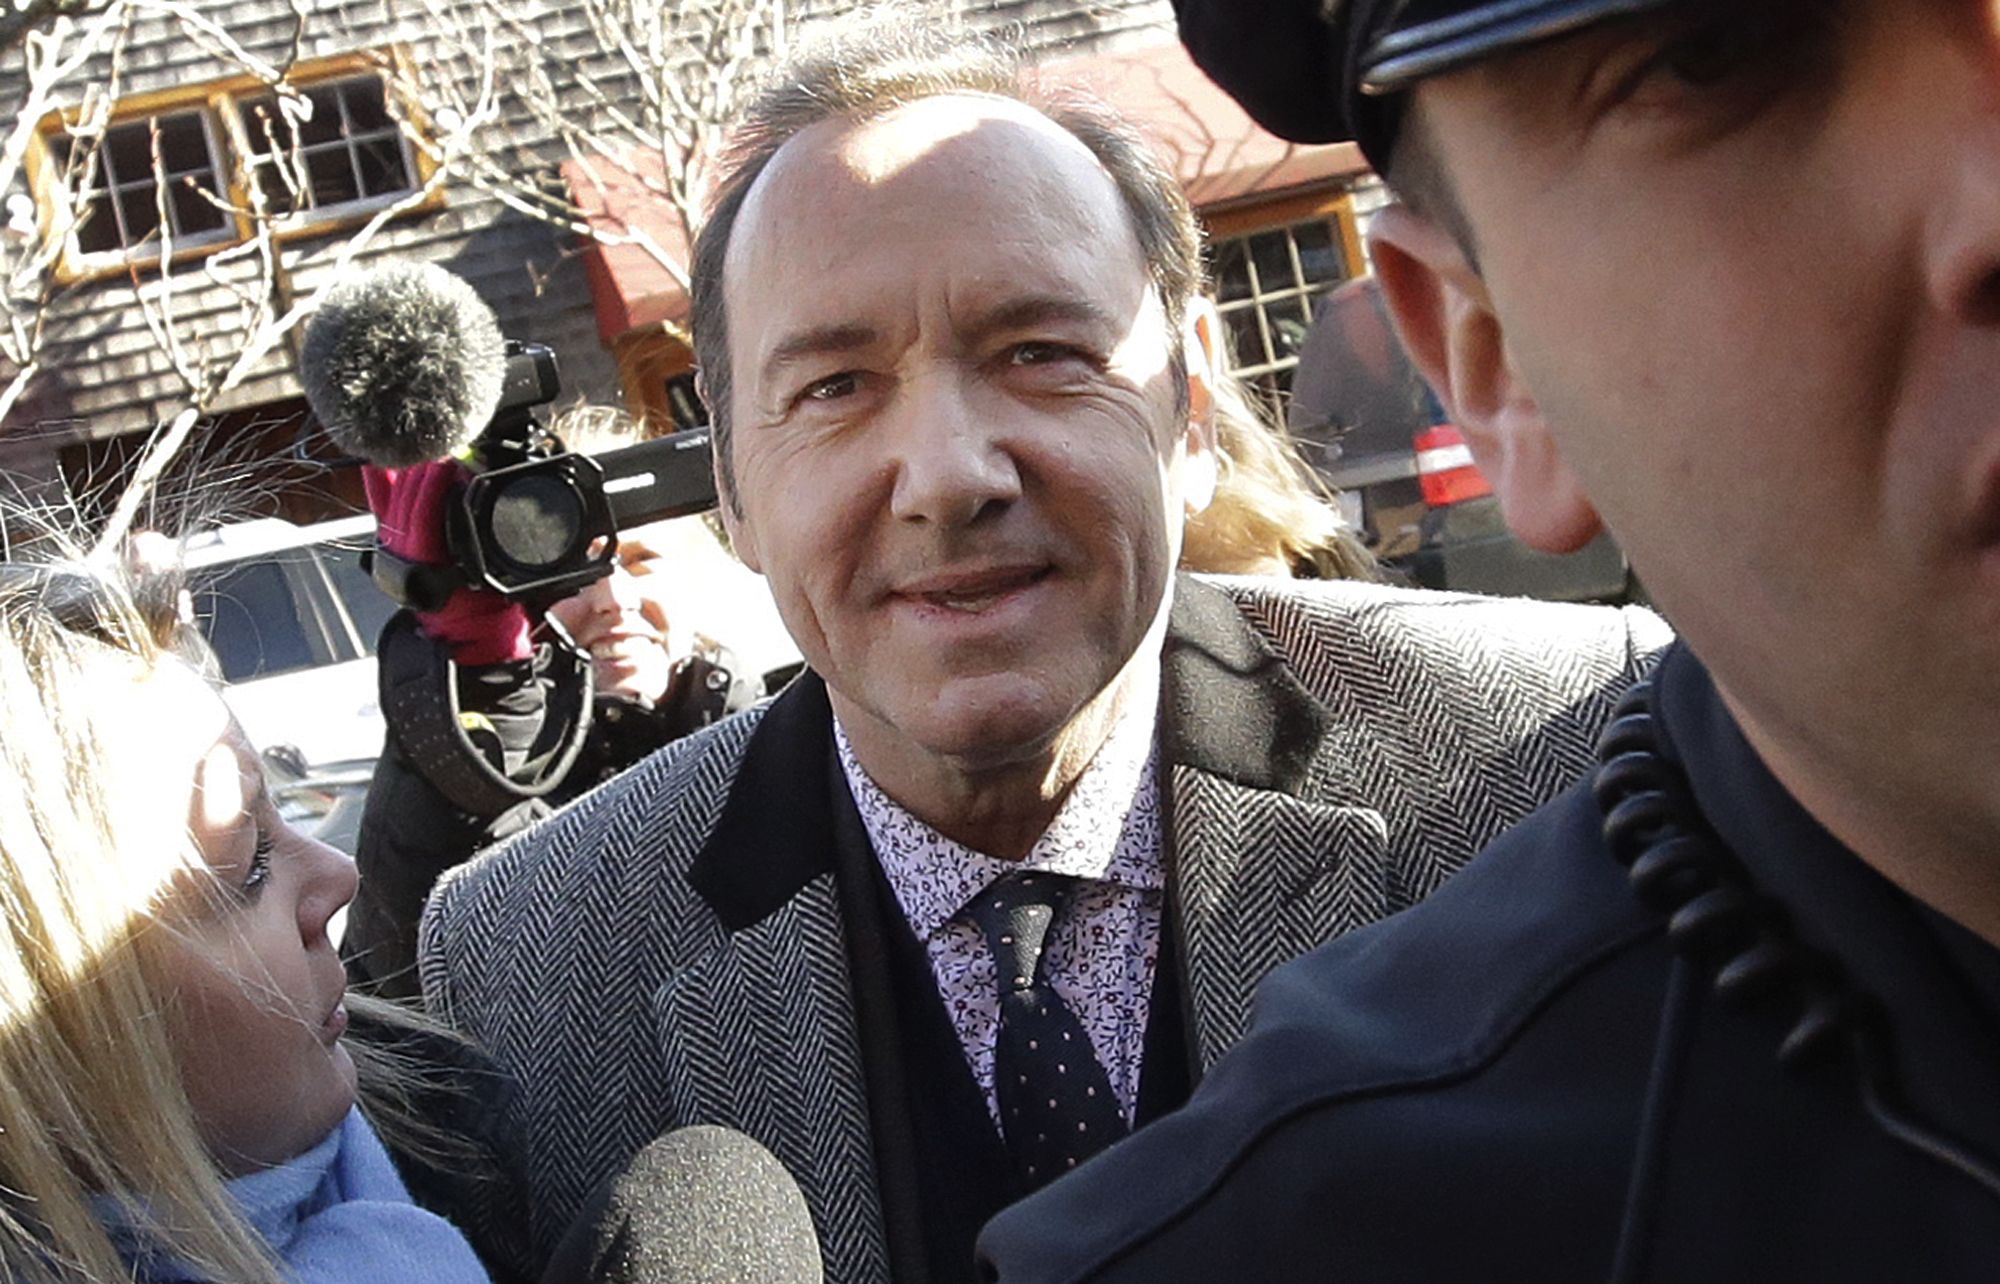 Kevin Spacey groping lawsuit dropped by accuser